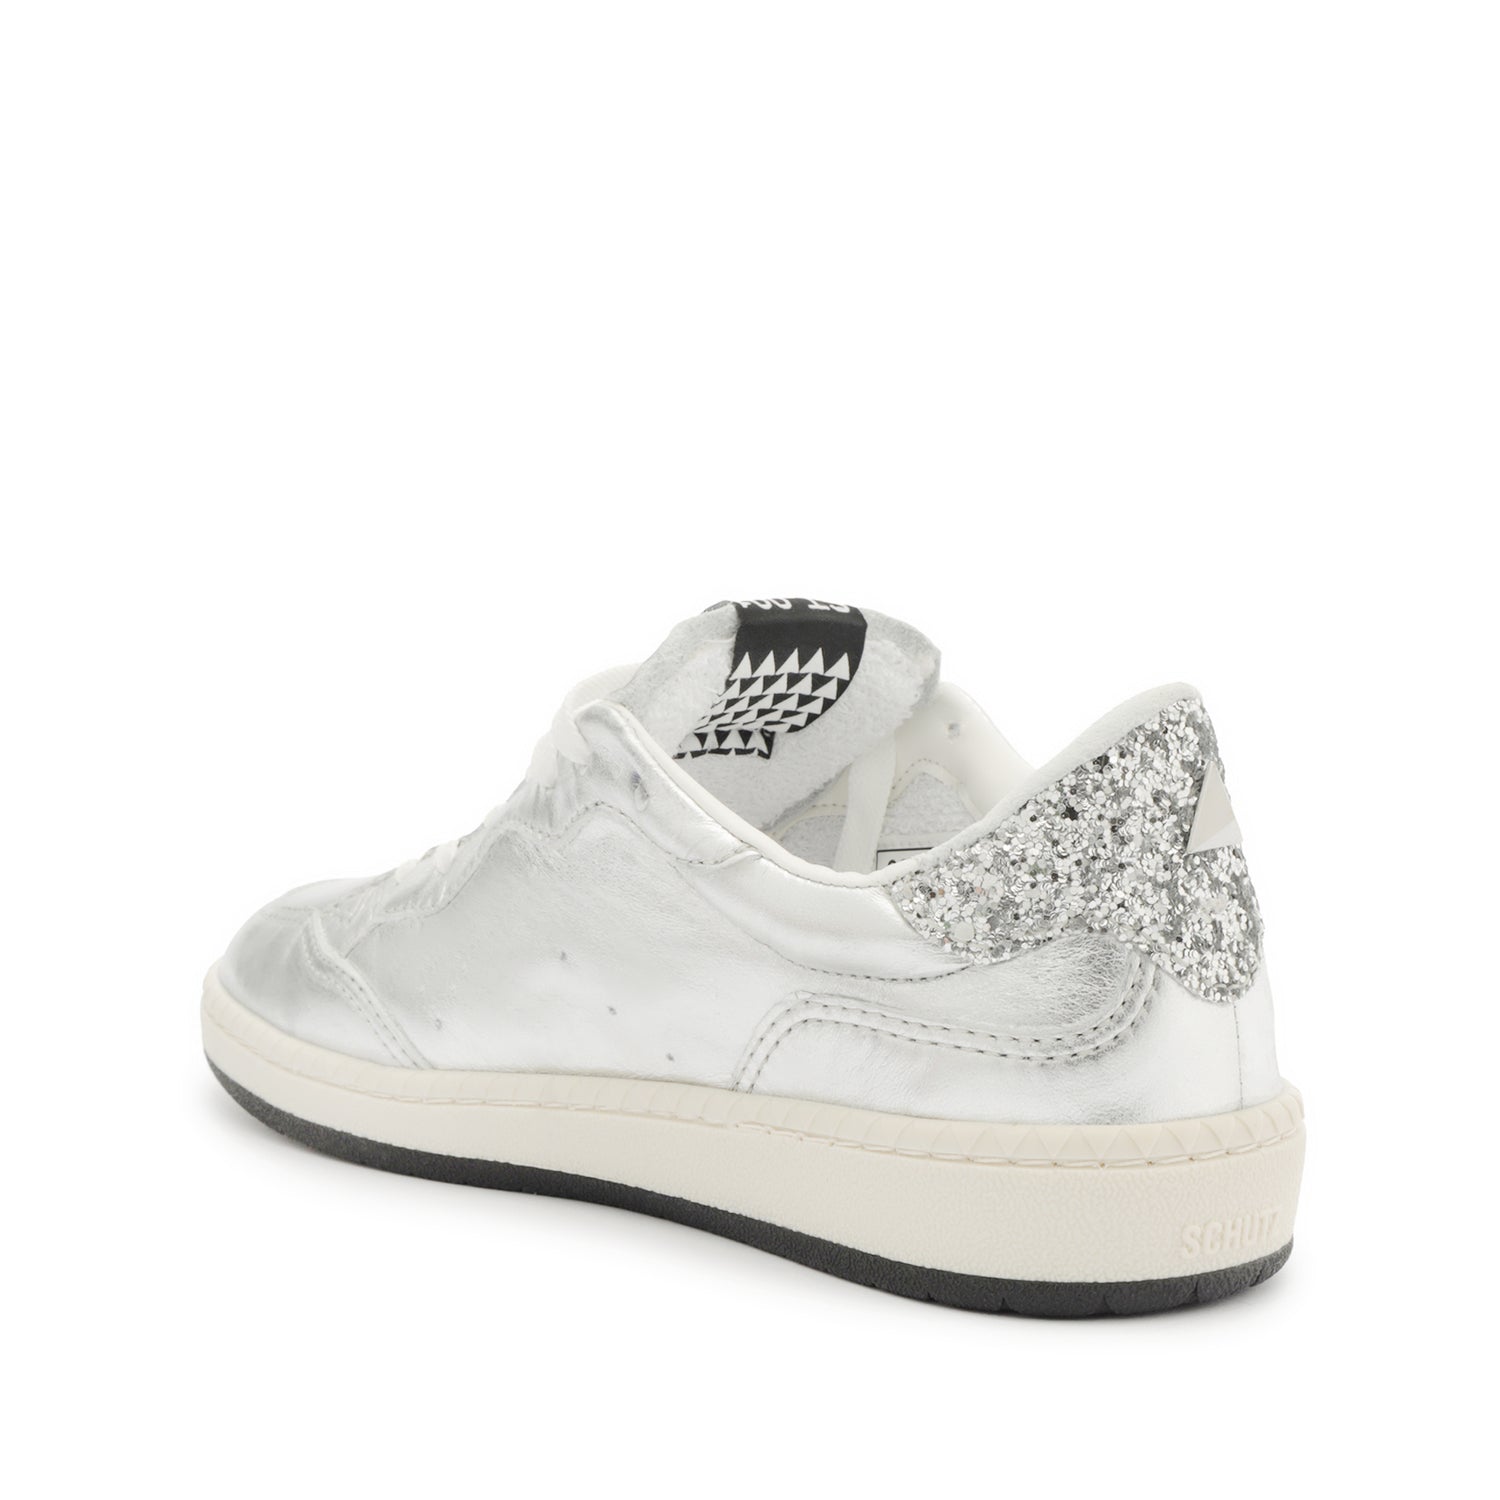 ST-001 Leather Sneaker Sneakers Spring 24    - Schutz Shoes